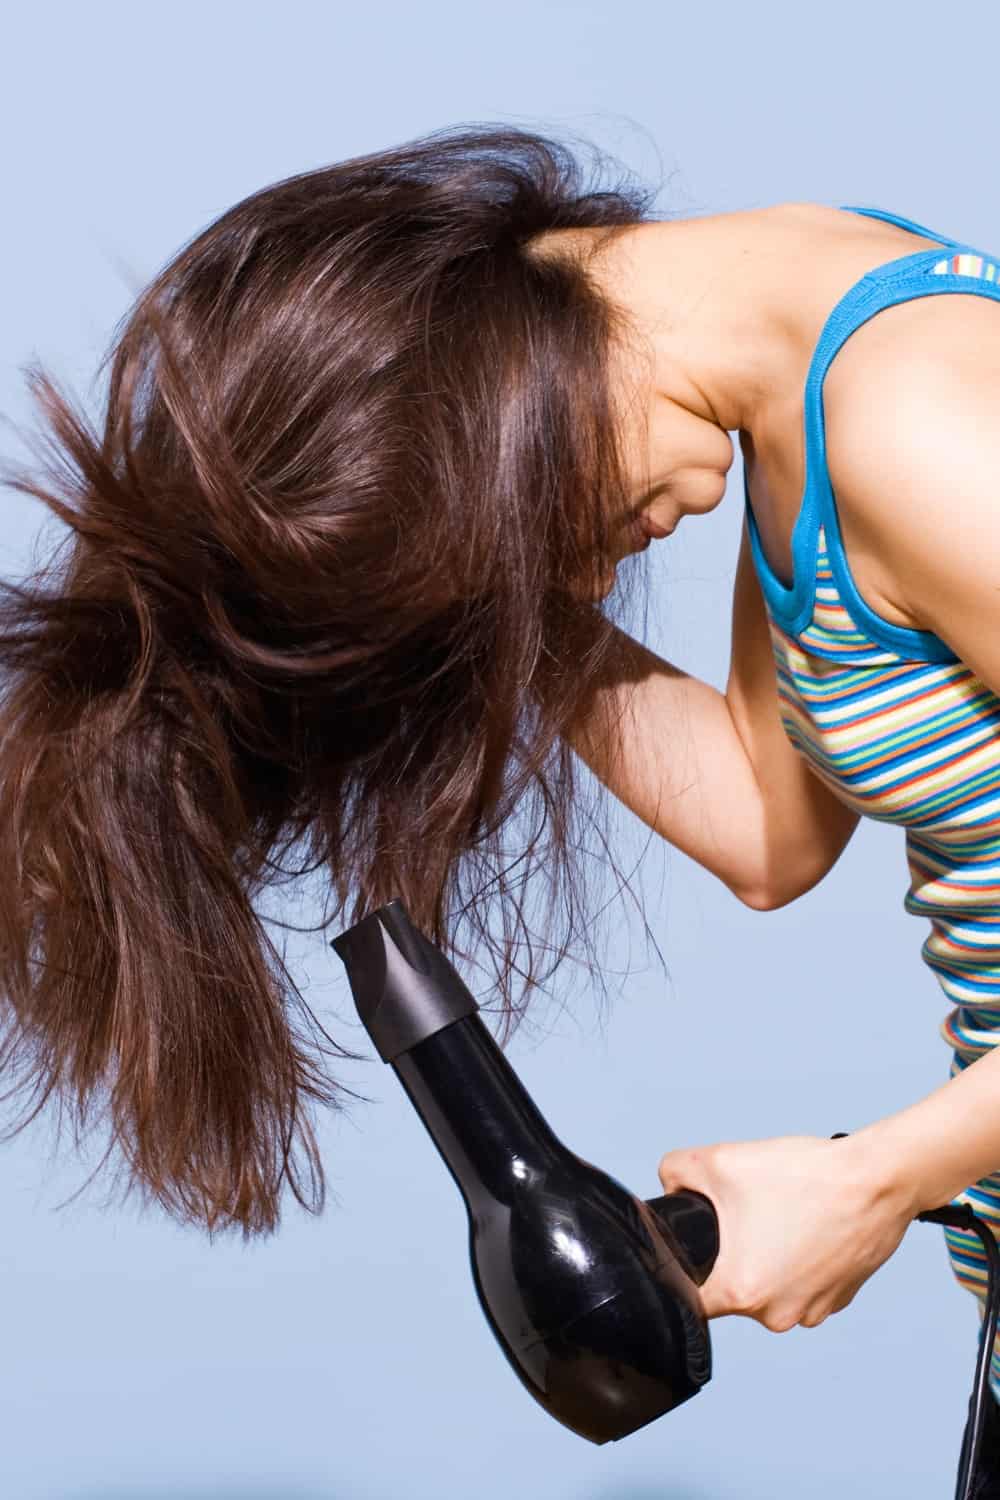 how to refresh hair after workout - cool blow dry